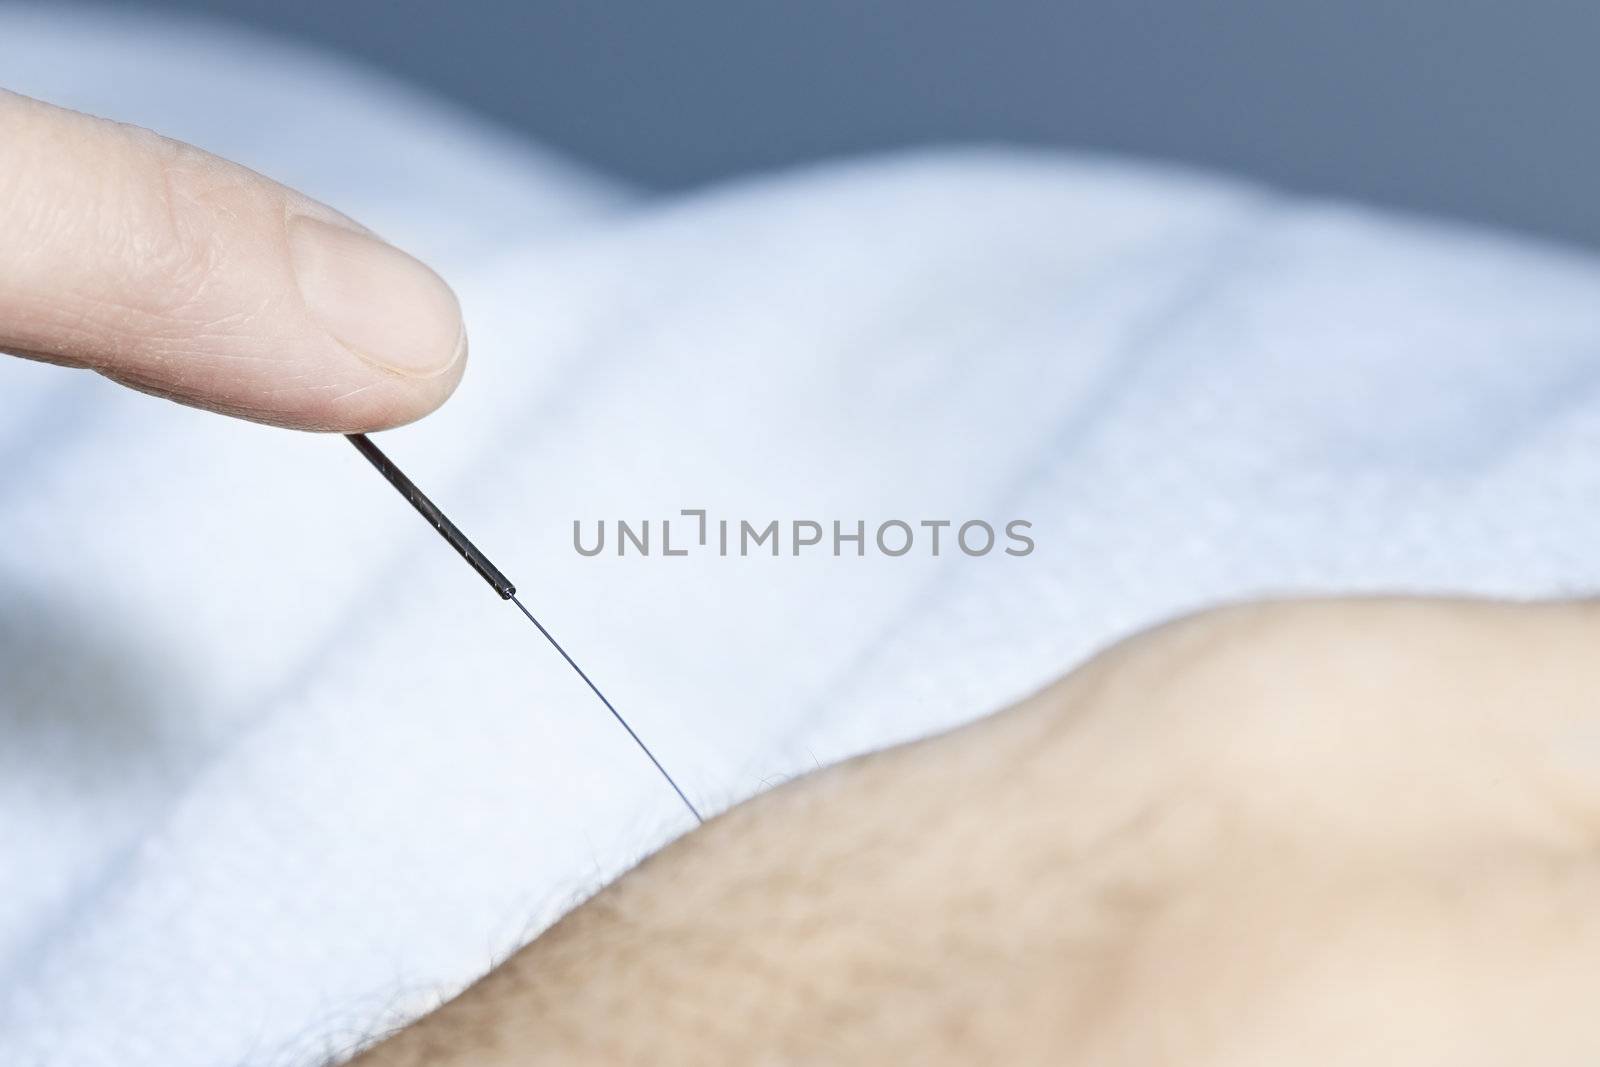 Acupuncture needle in skin by elenathewise